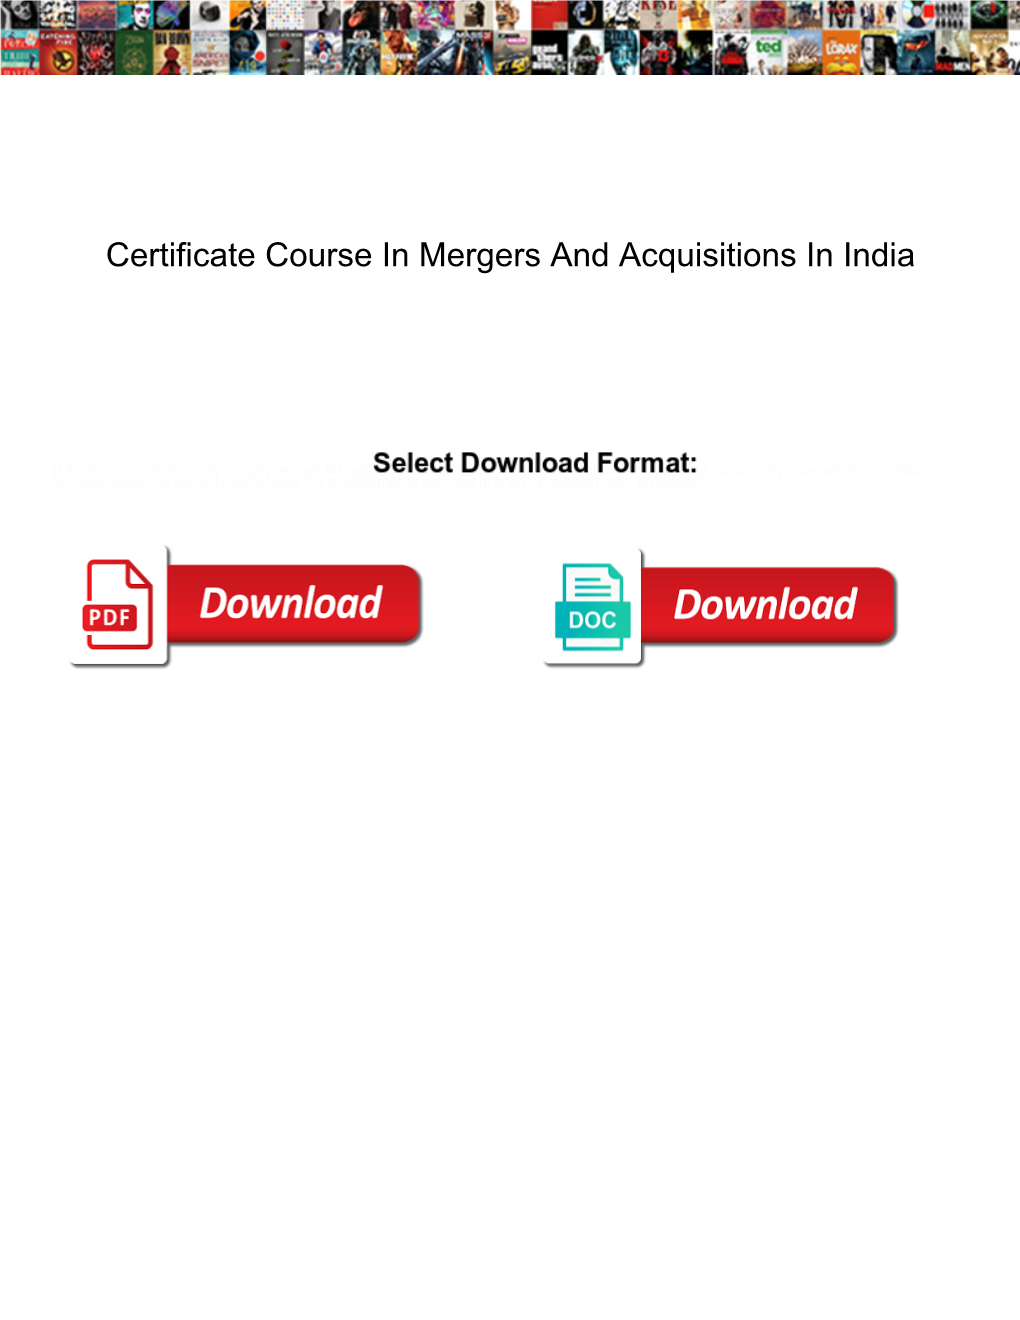 Certificate Course in Mergers and Acquisitions in India